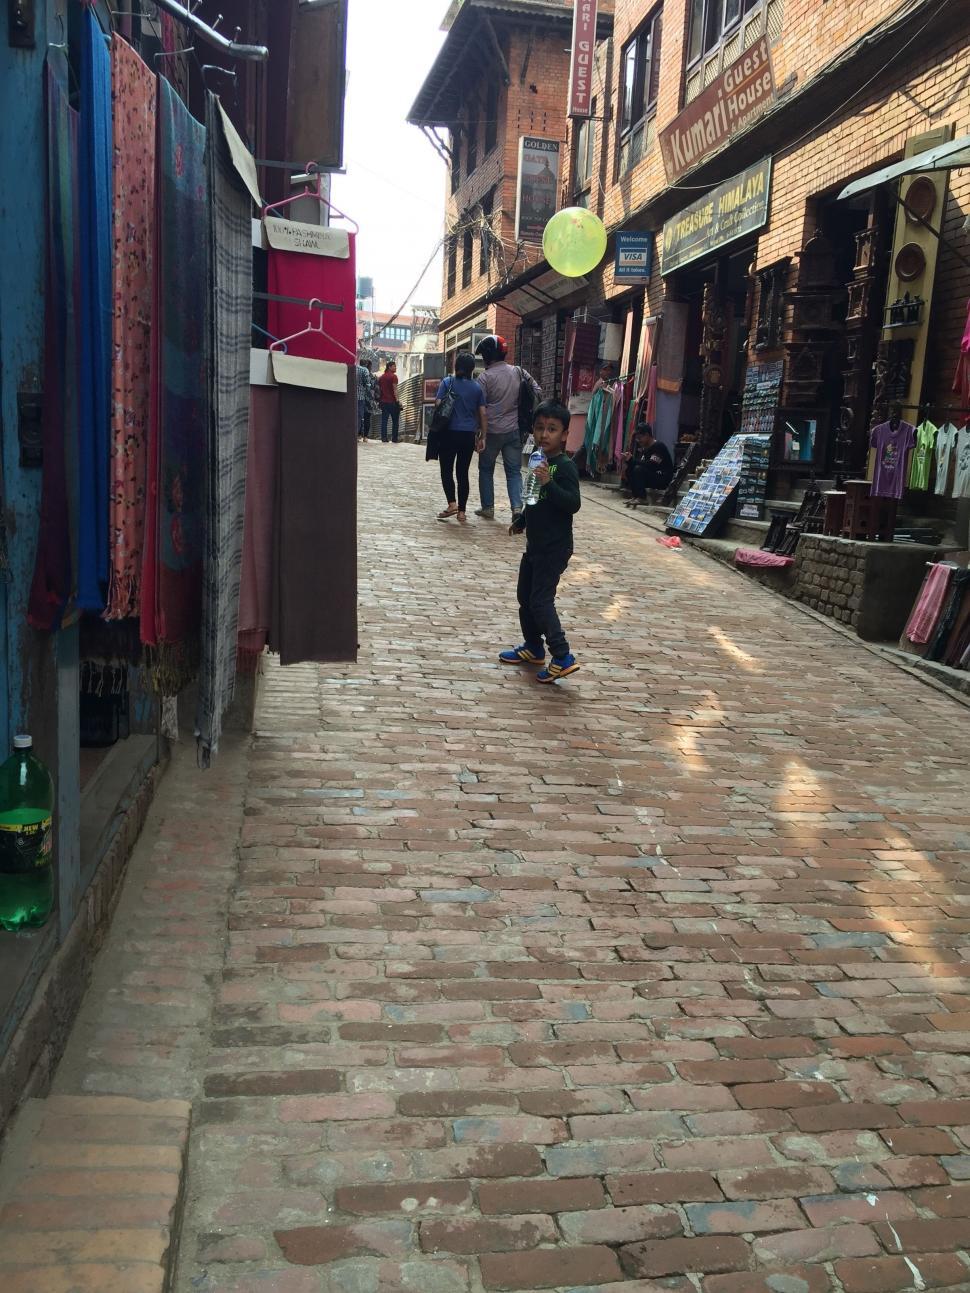 Free Image of Child in Market 